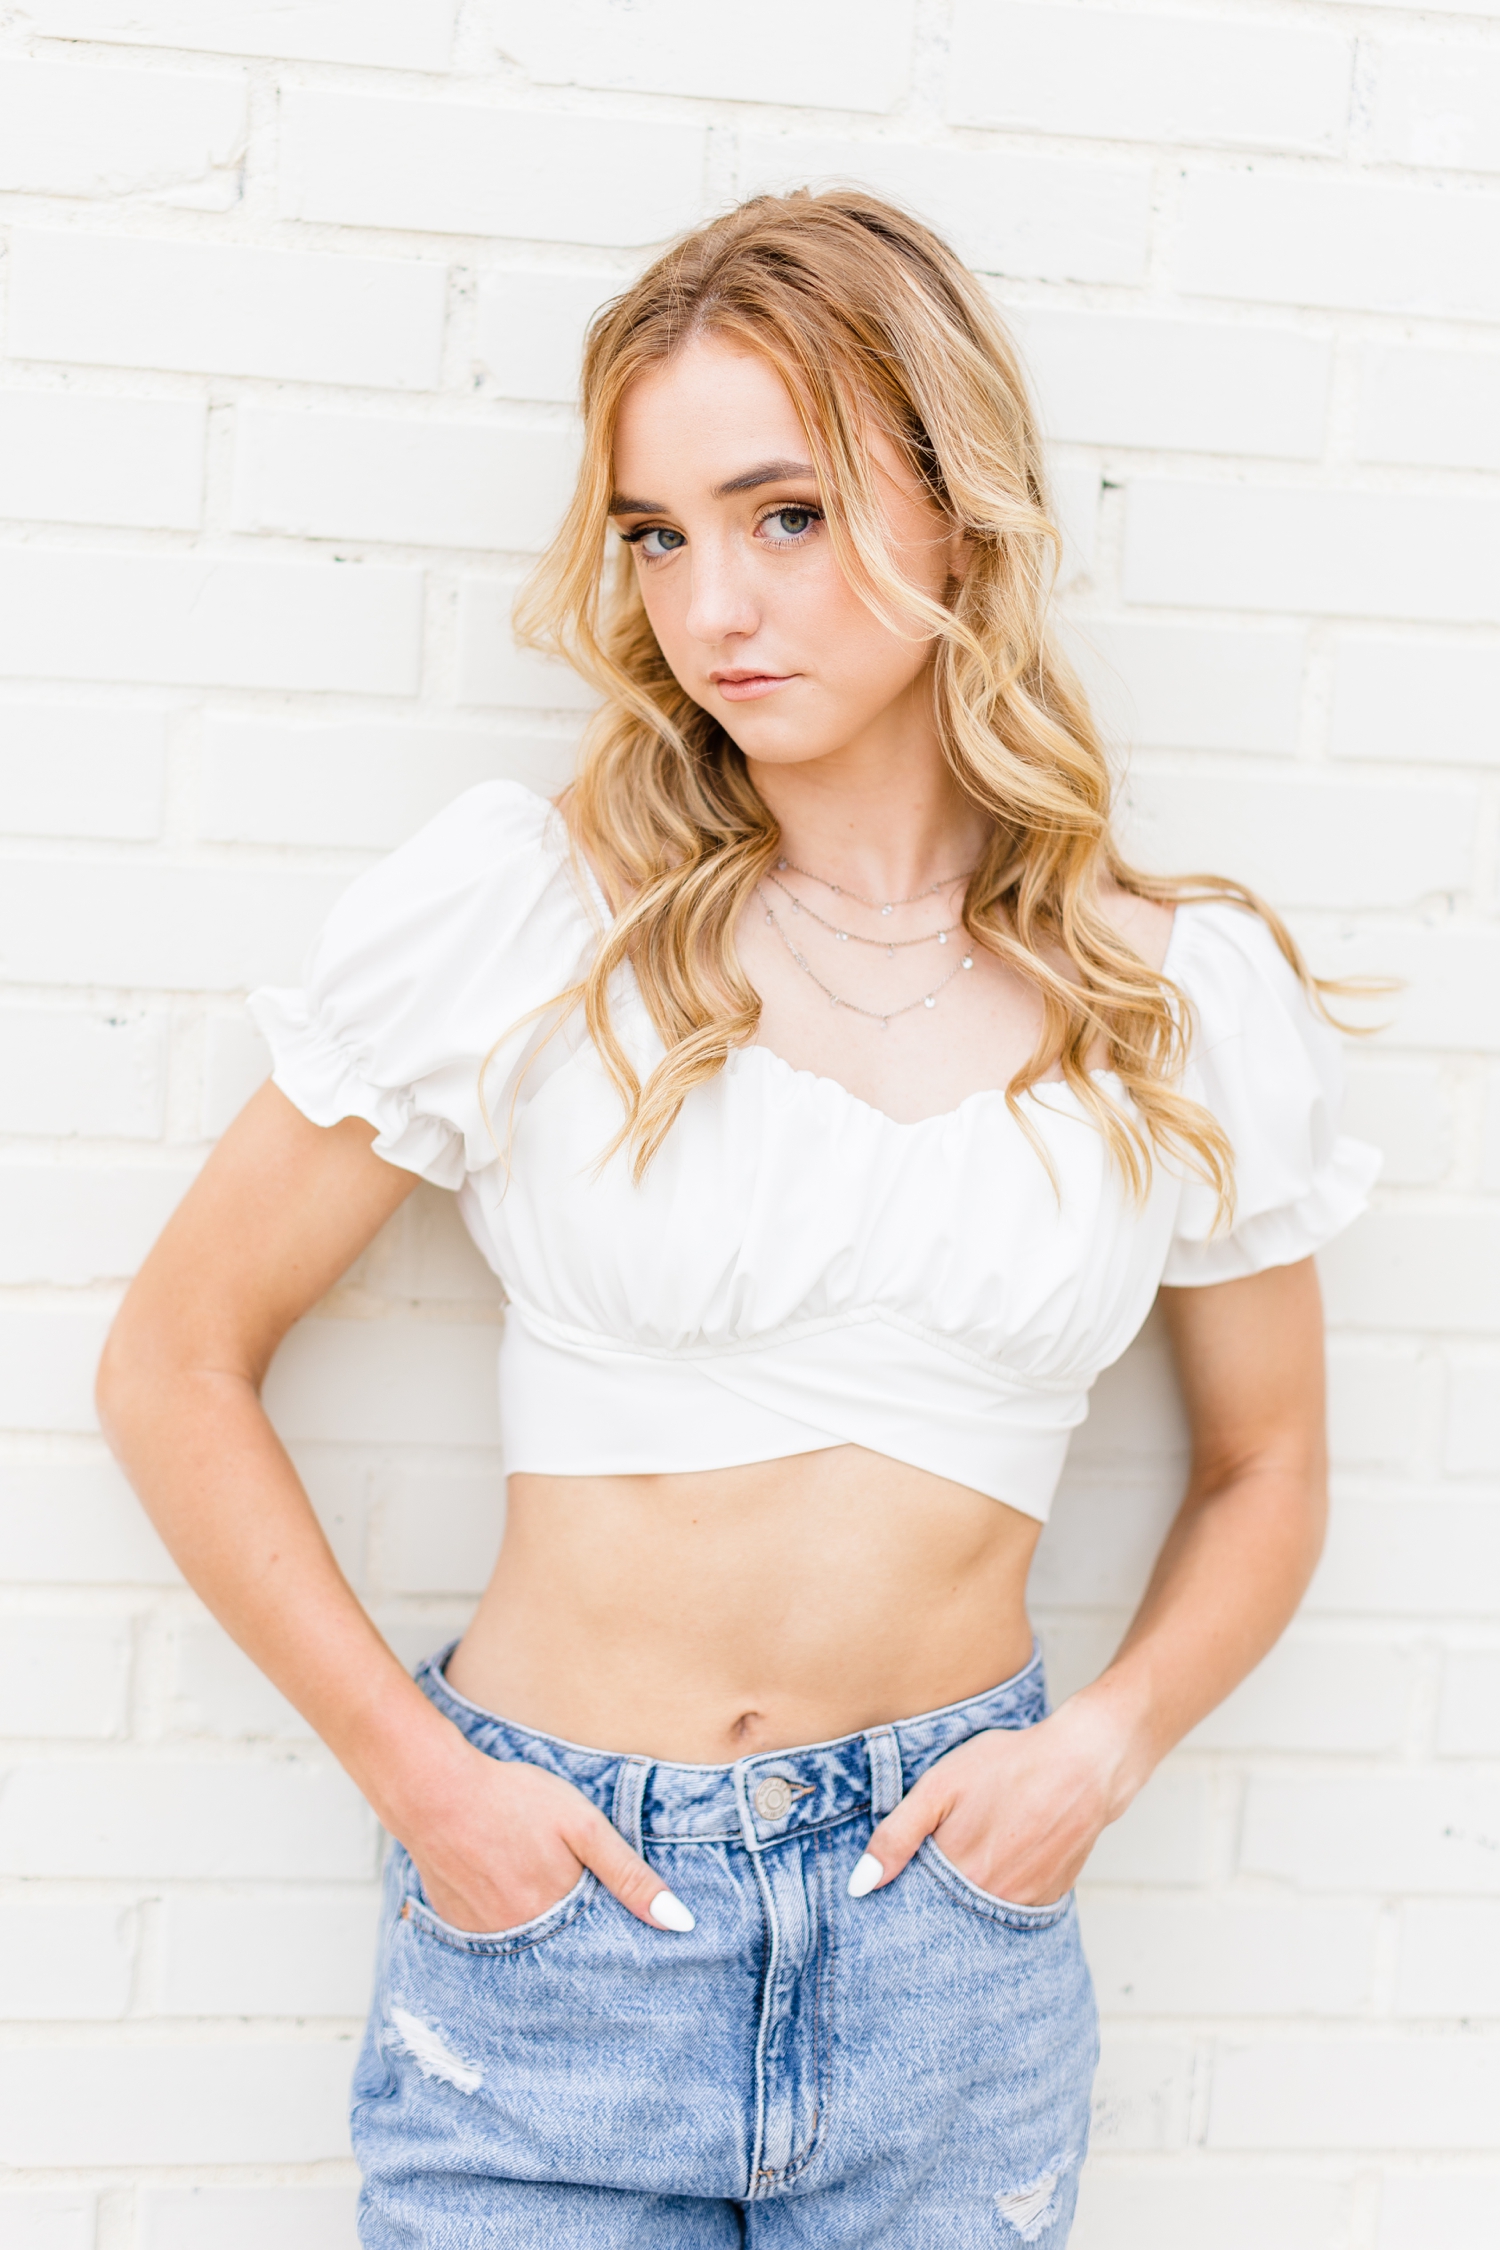 Raegan wearing a white ruffled cropped top with jeans, leans against a white brick wall | CB Studio